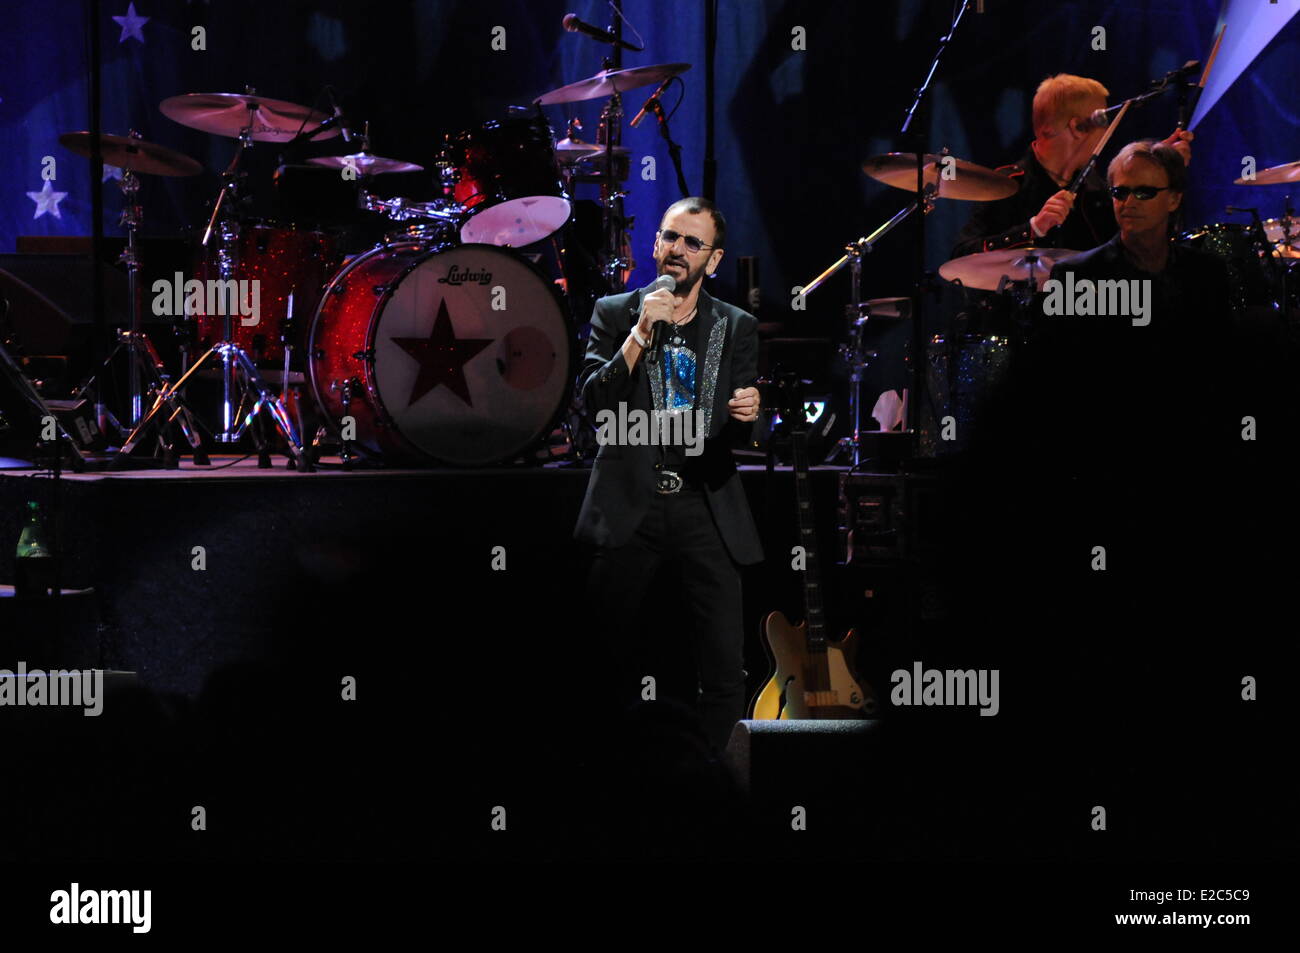 New York, New York, USA. 18th June, 2014. RINGO STARR and his All Star Band performing at the Beacon Theater. Credit:  Jeffrey Geller/ZUMA Wire/ZUMAPRESS.com/Alamy Live News Stock Photo